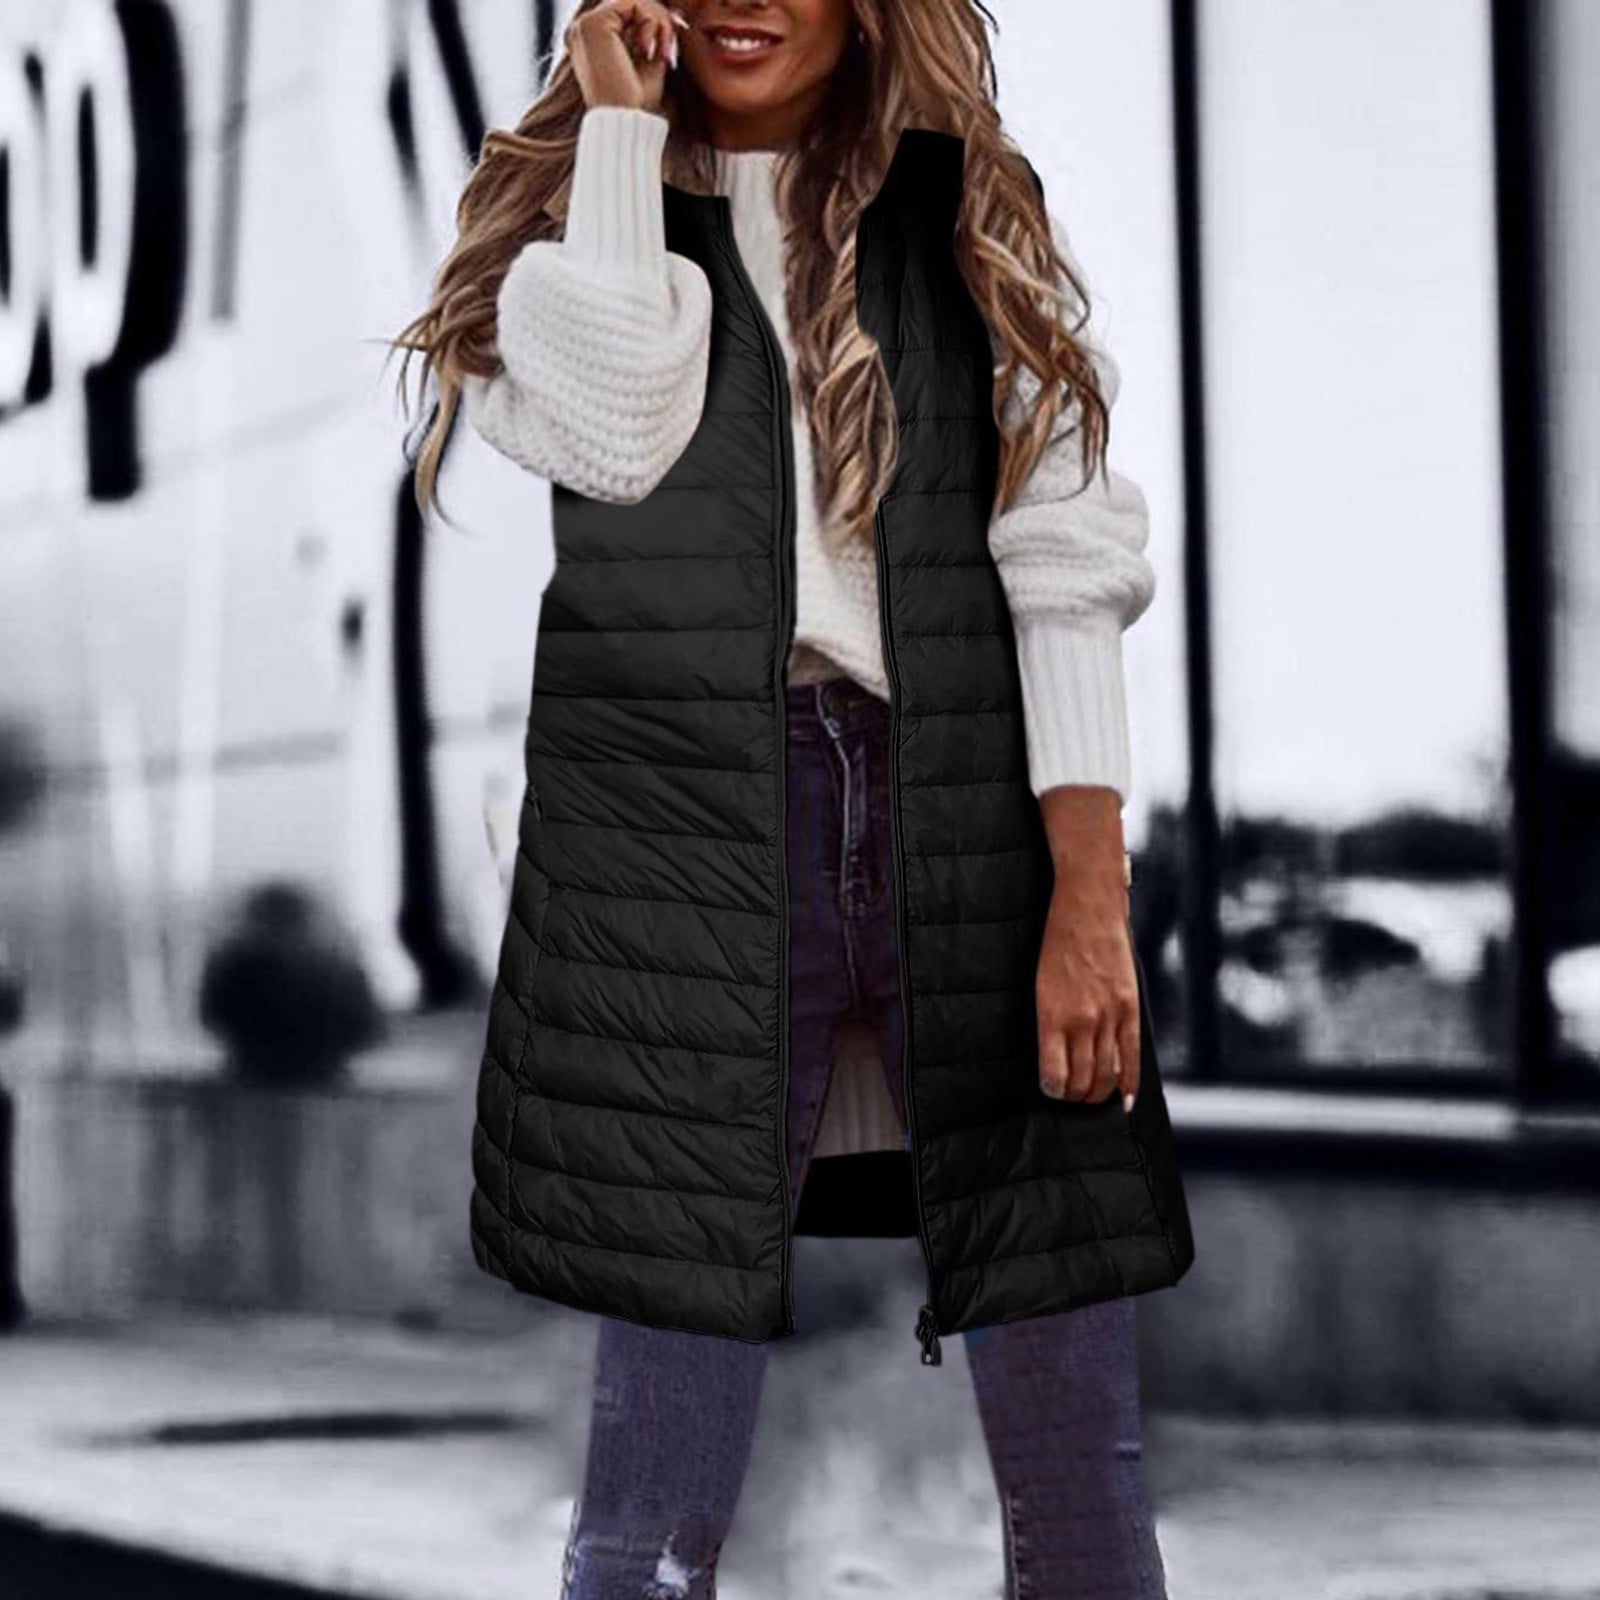 Day 3 of comfy winter outfits— no leggings allowed!! If you thought you'd  make it a week without seeing this puffer vest, you were